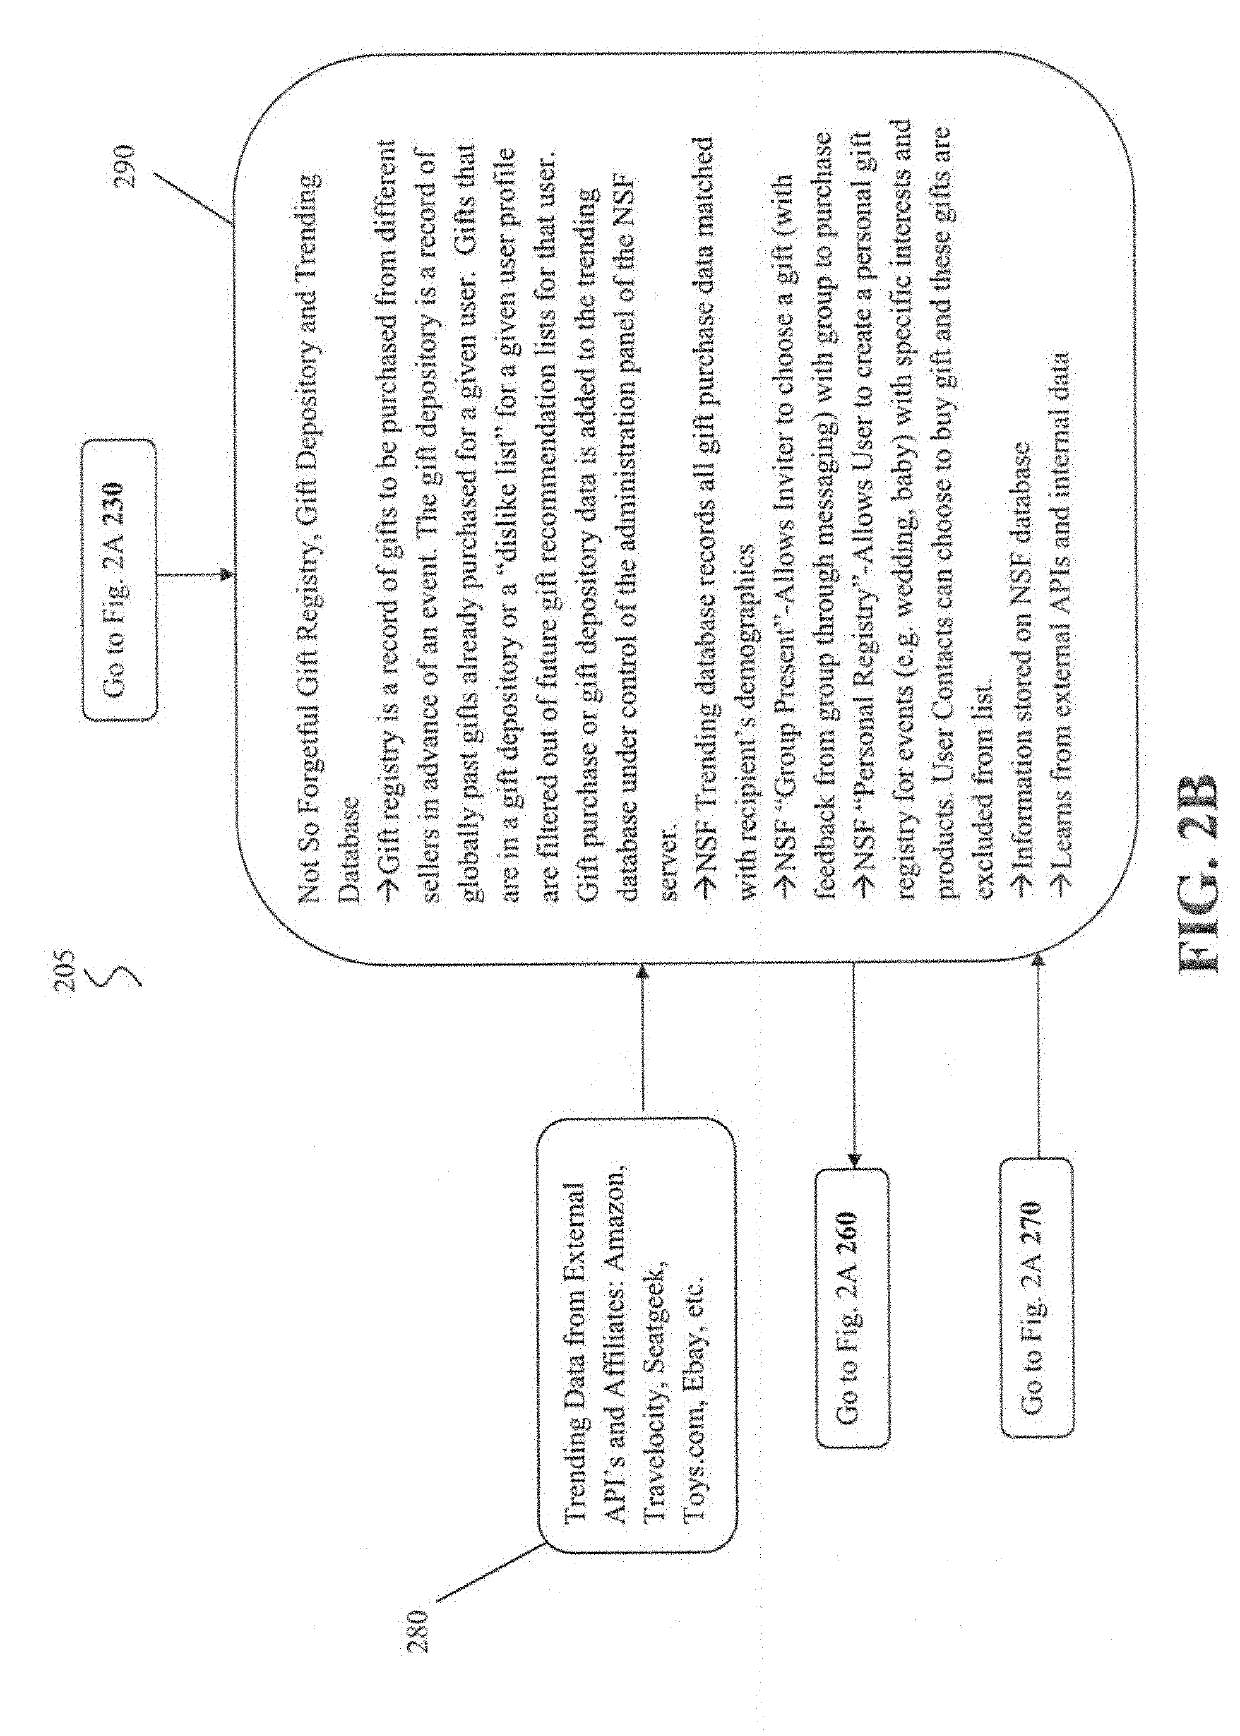 Apparatus and system for providing reminders and recommendations, storing personal information, memory assistance and facilitating related purchases through an interconnected social network